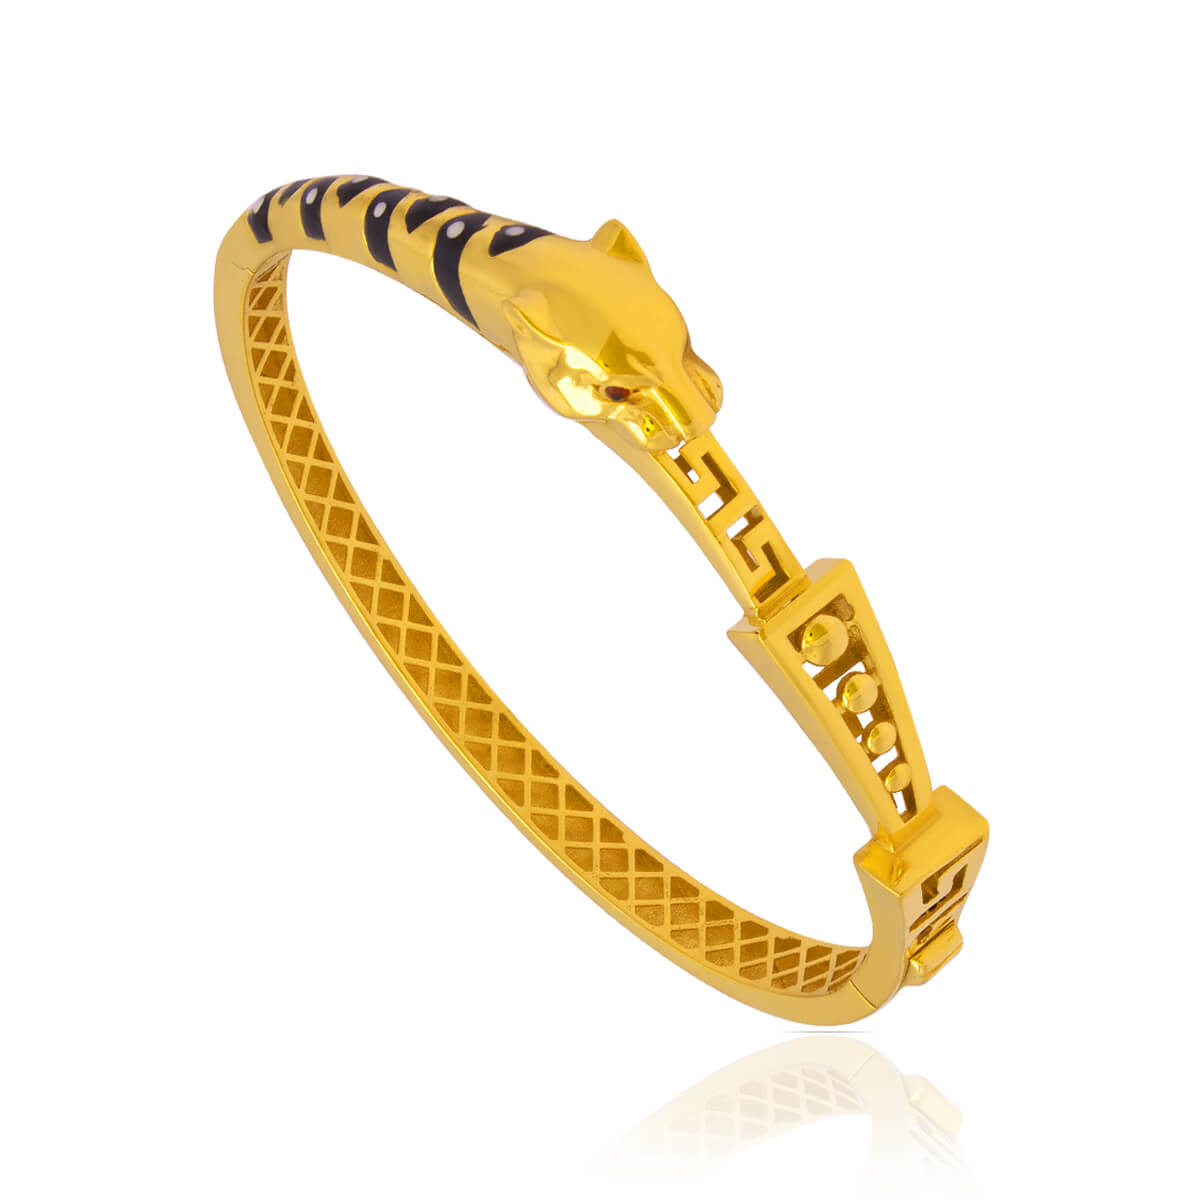 19 Latest Gold Bracelet Designs 2023 with Price Updated - People choice-baongoctrading.com.vn